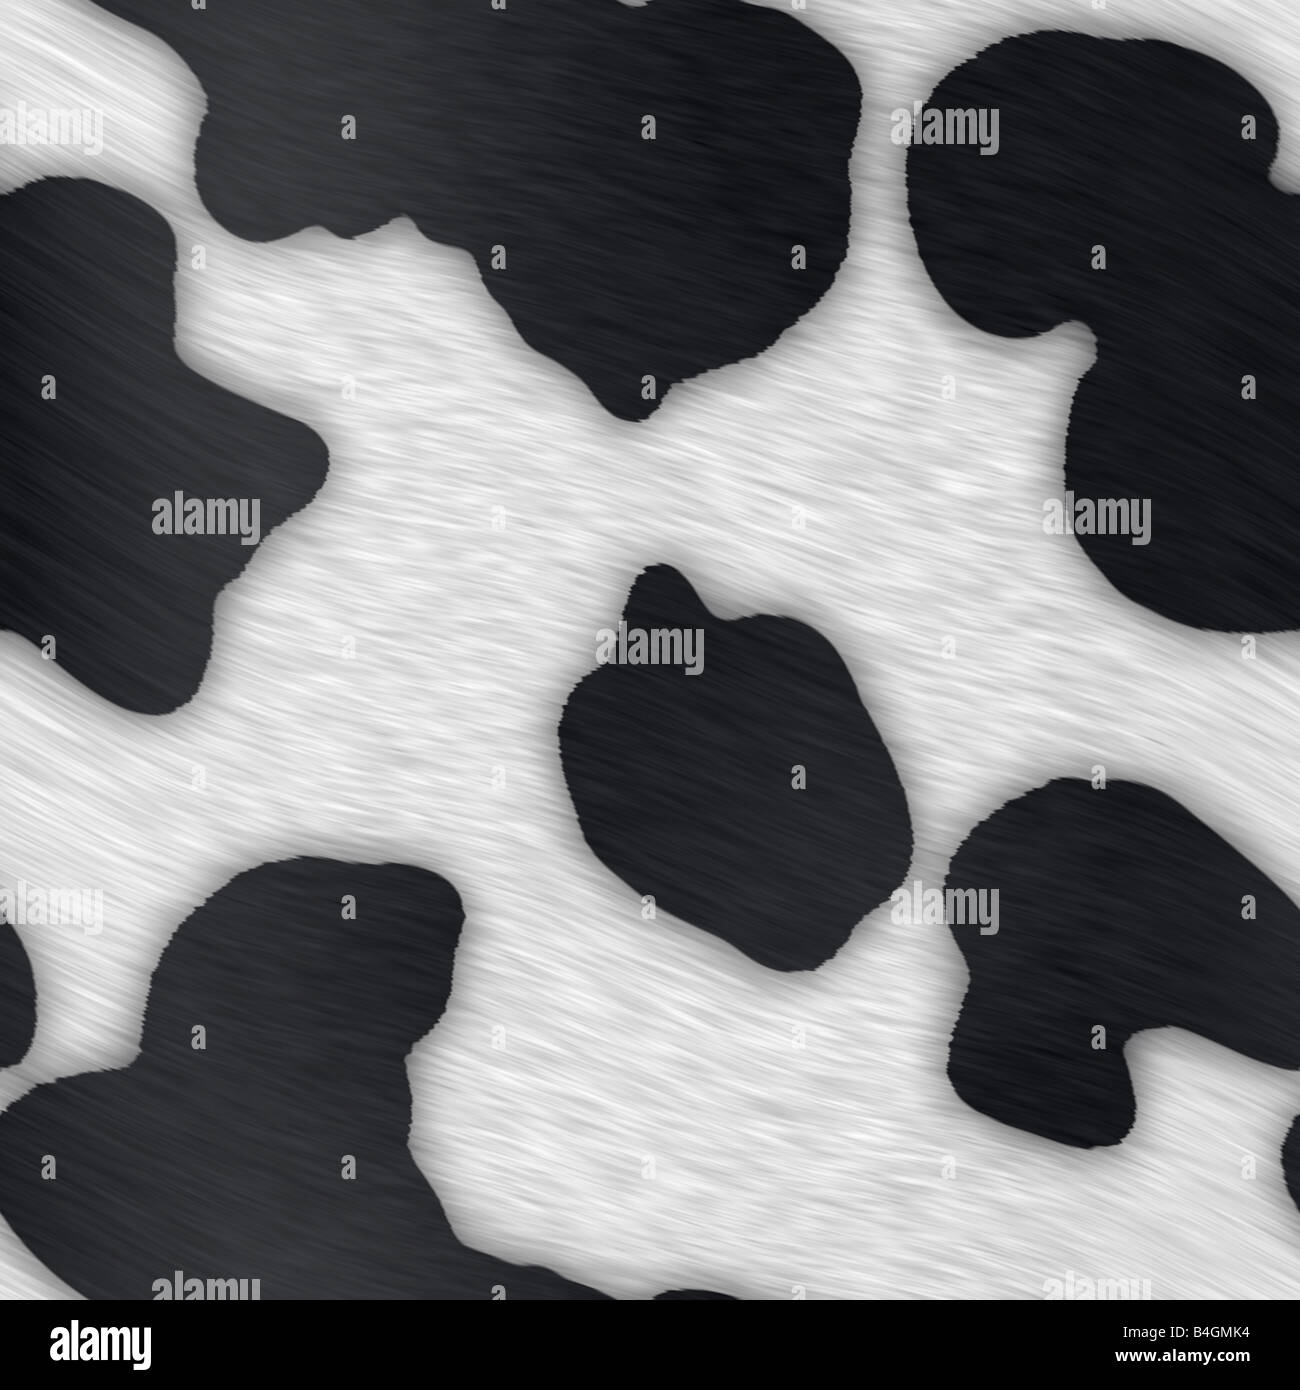 Removable Wallpaper Swatch - Cow Print Animal Black White Modern Custom  Pre-pasted Wallpaper by Spoonflower 